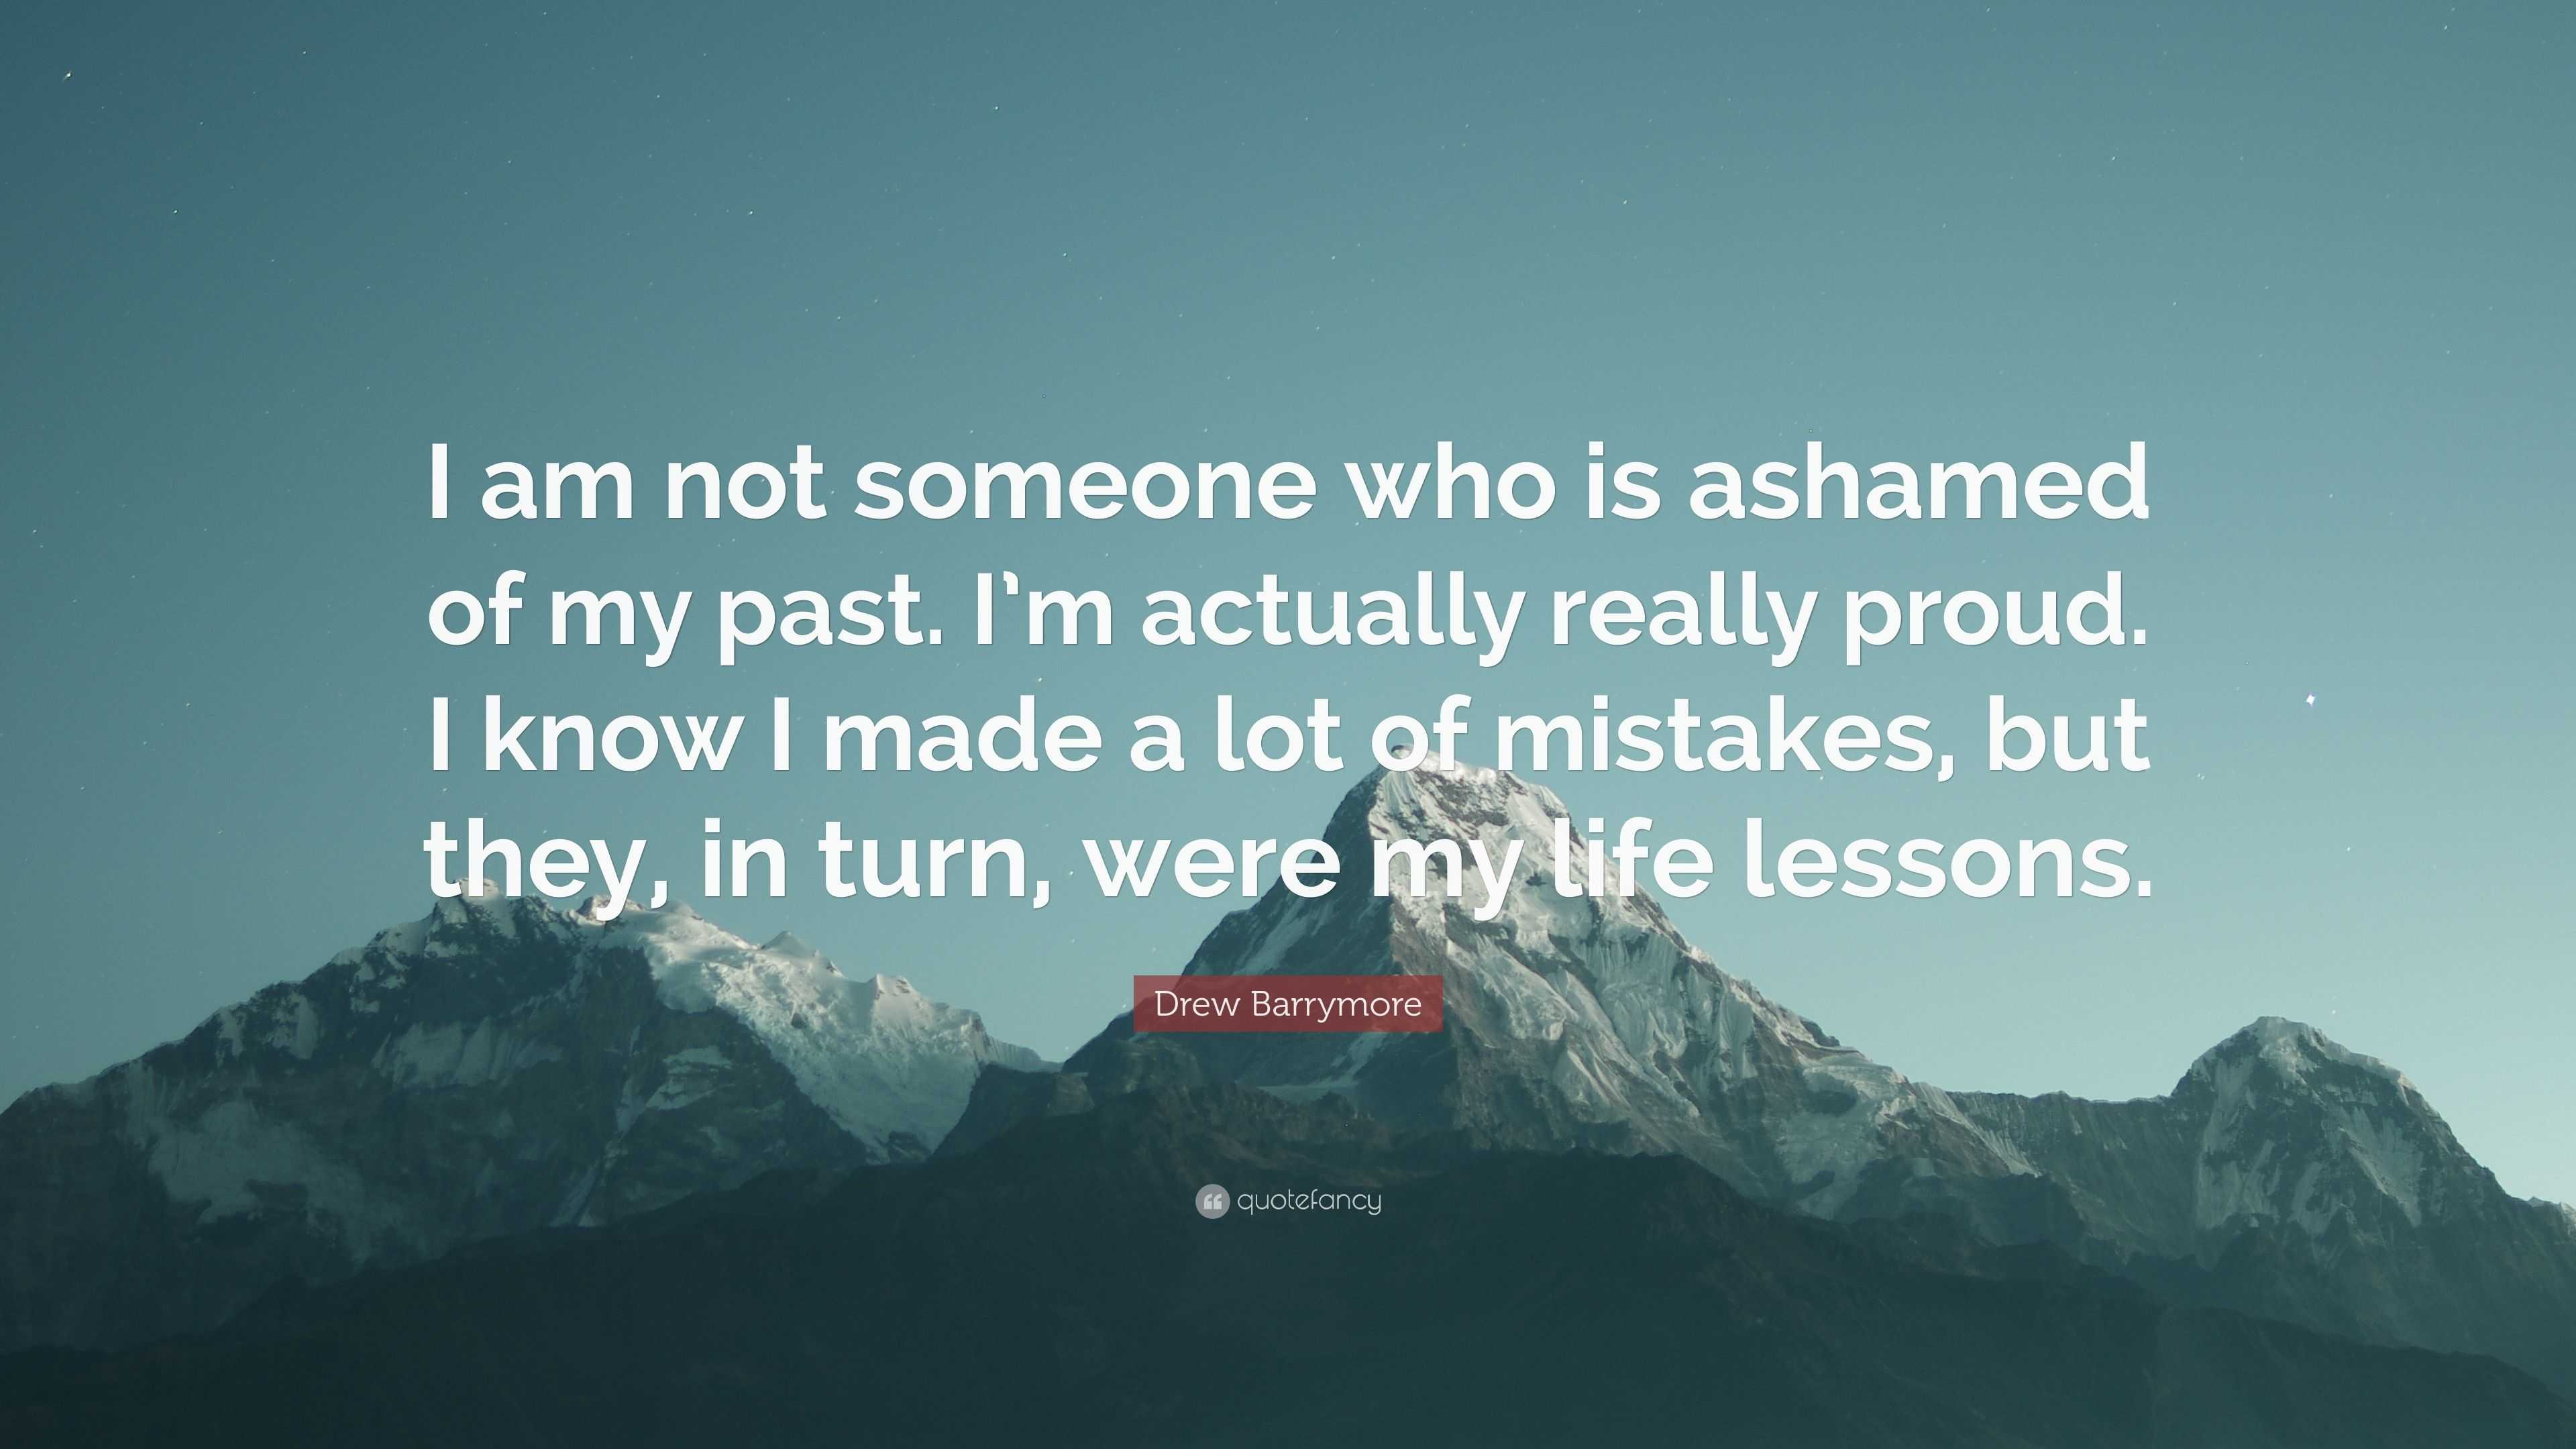 my past life quotes drew barrymore quote u201ci am not someone who is ashamed of my past